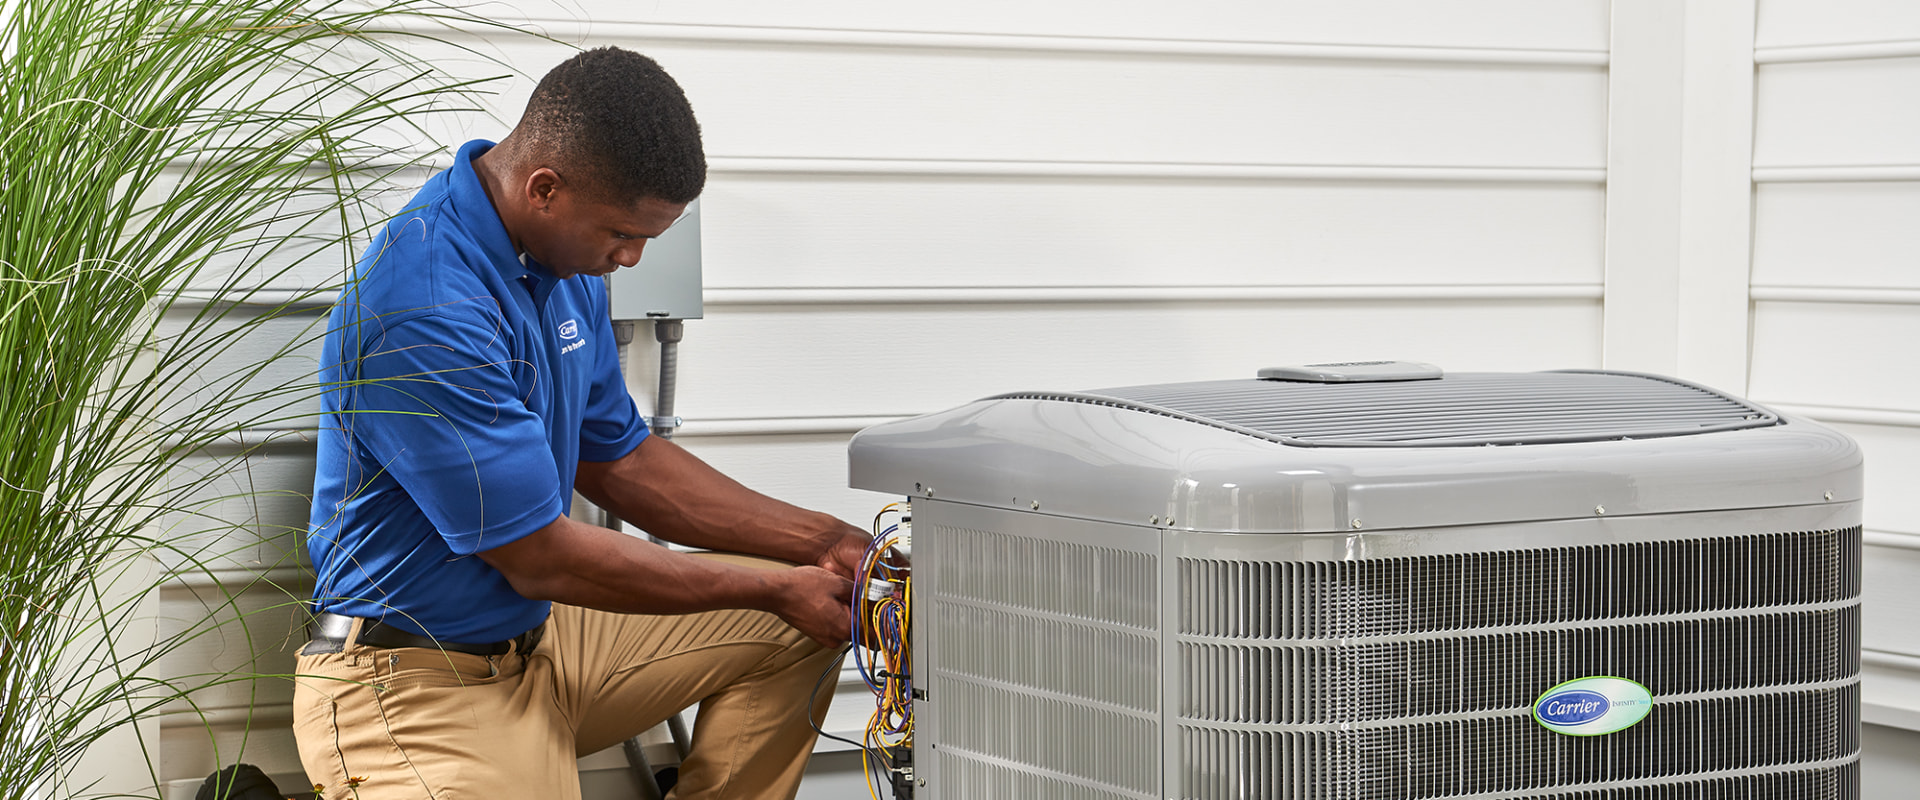 How Long Does an HVAC System Last? - Get the Most Out of Your Investment